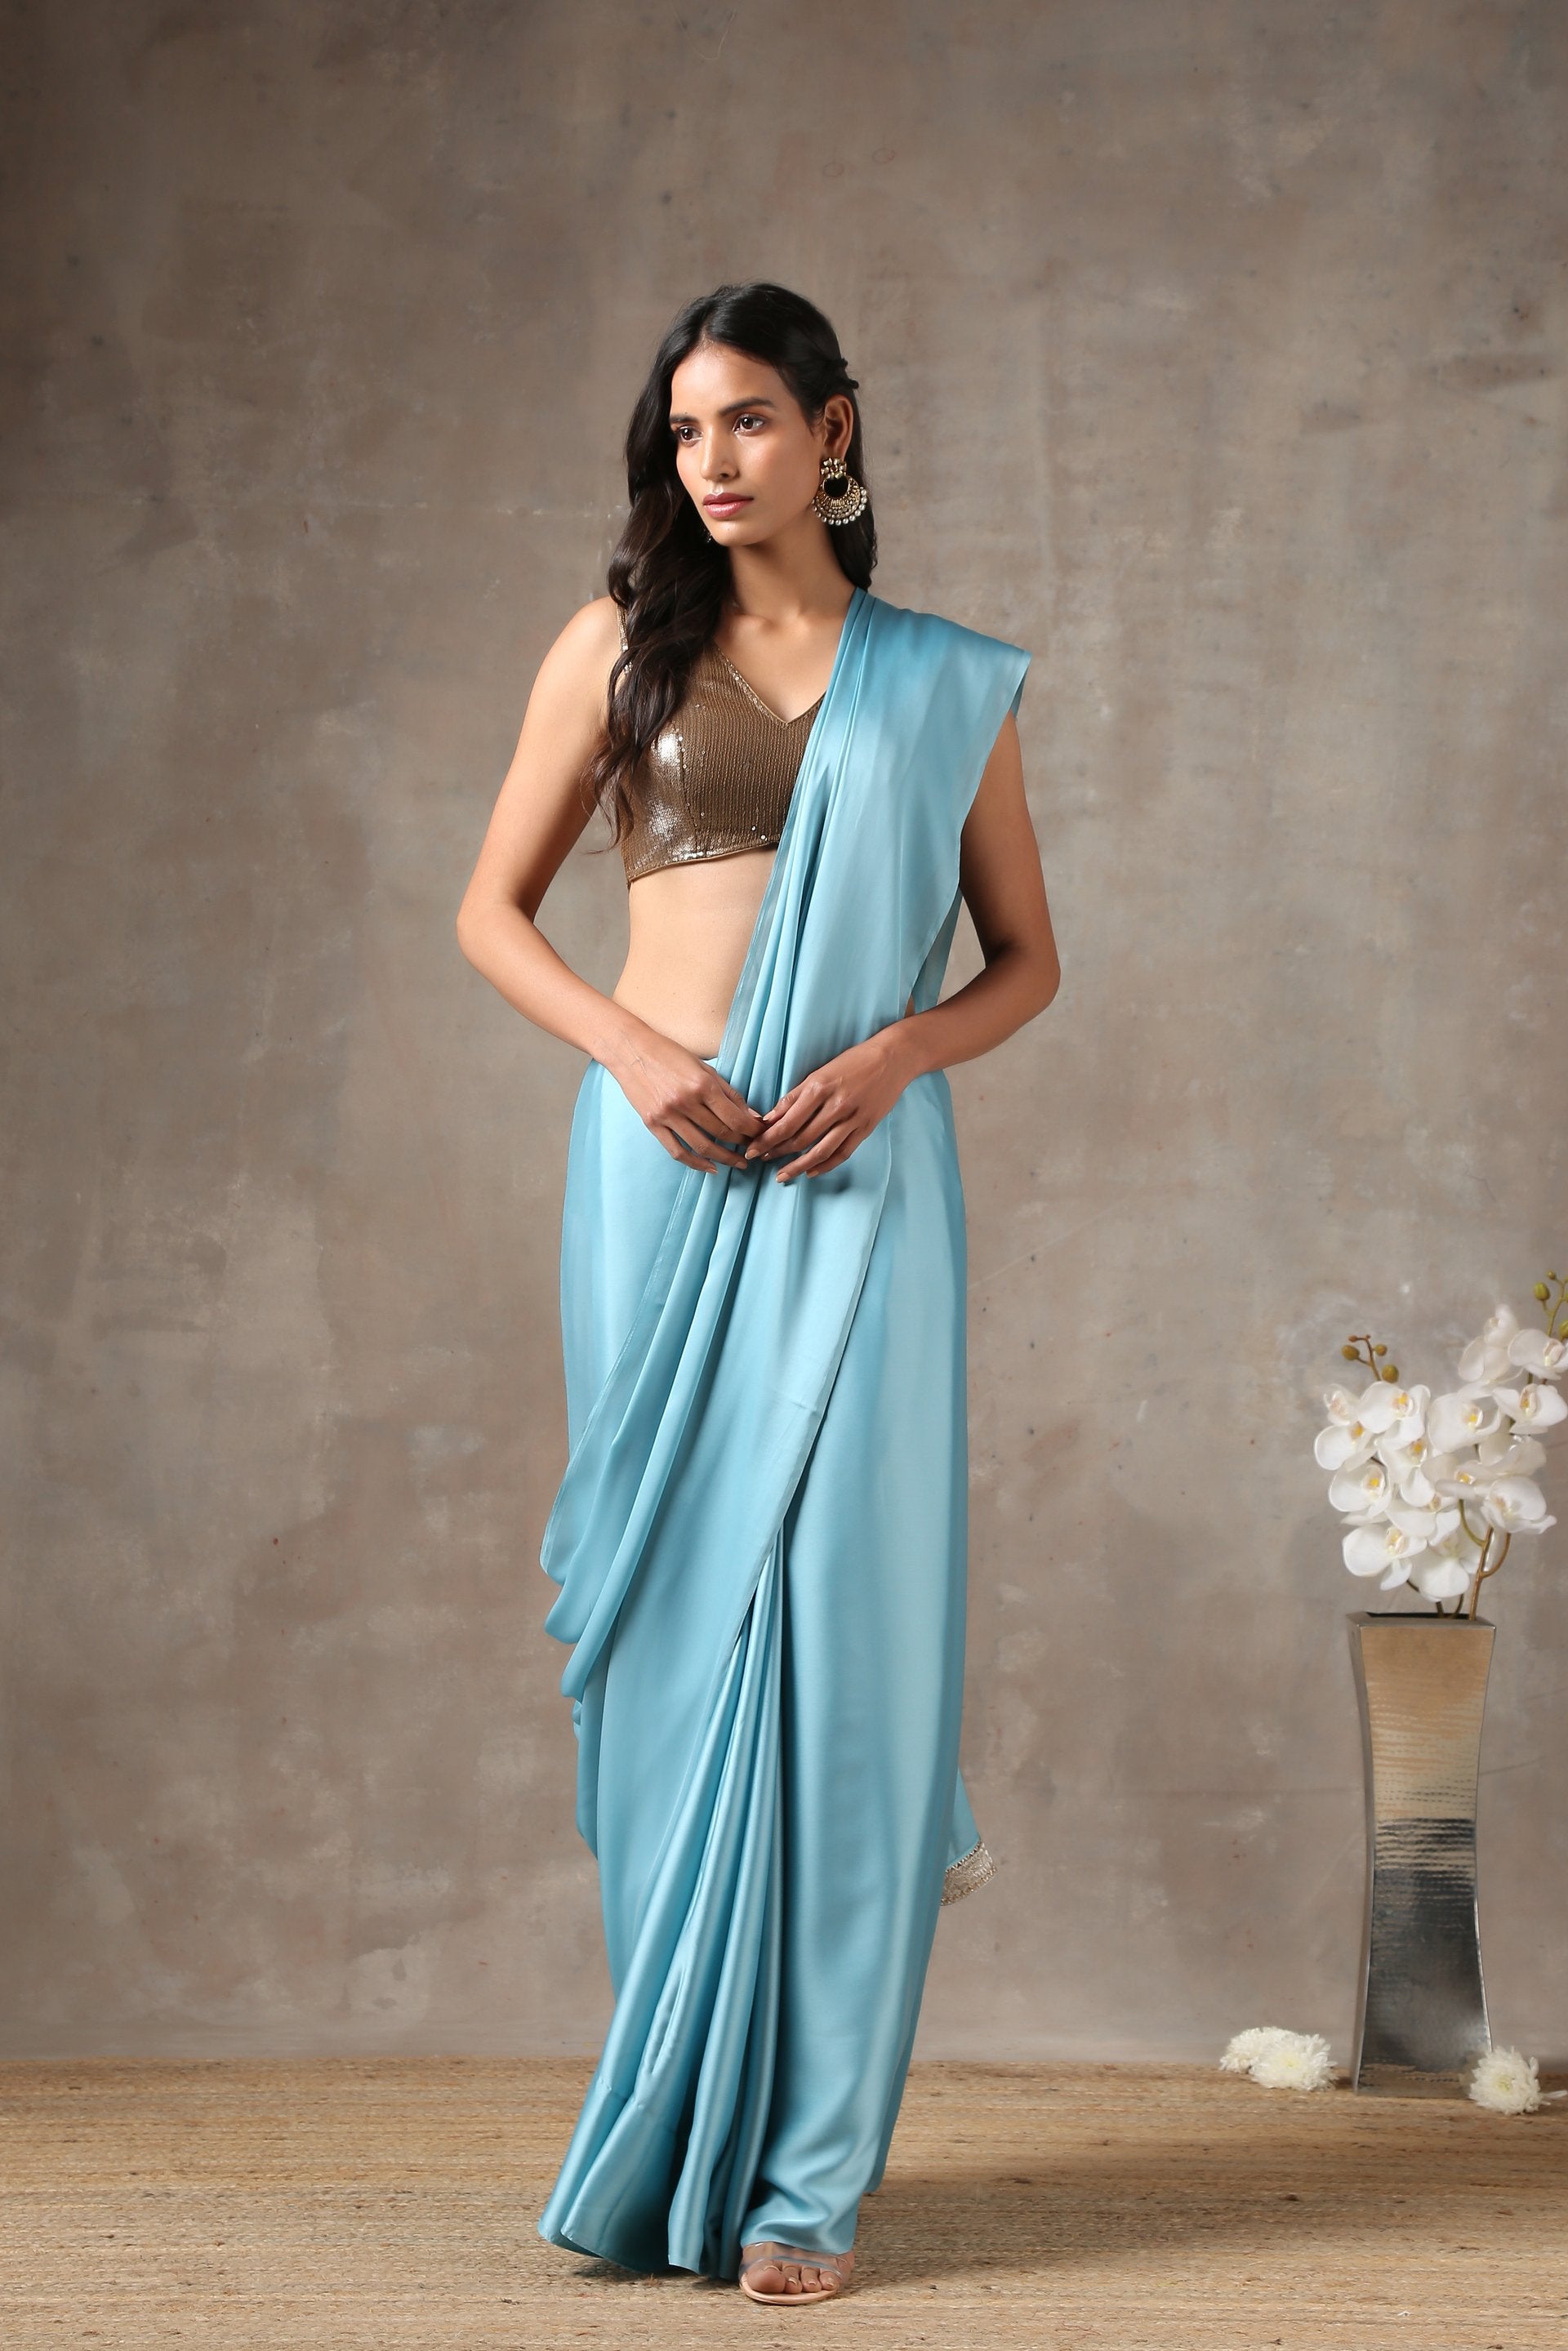 5 Saree Hacks to Look Slim – Without Actually Losing Weight! – Swtantra